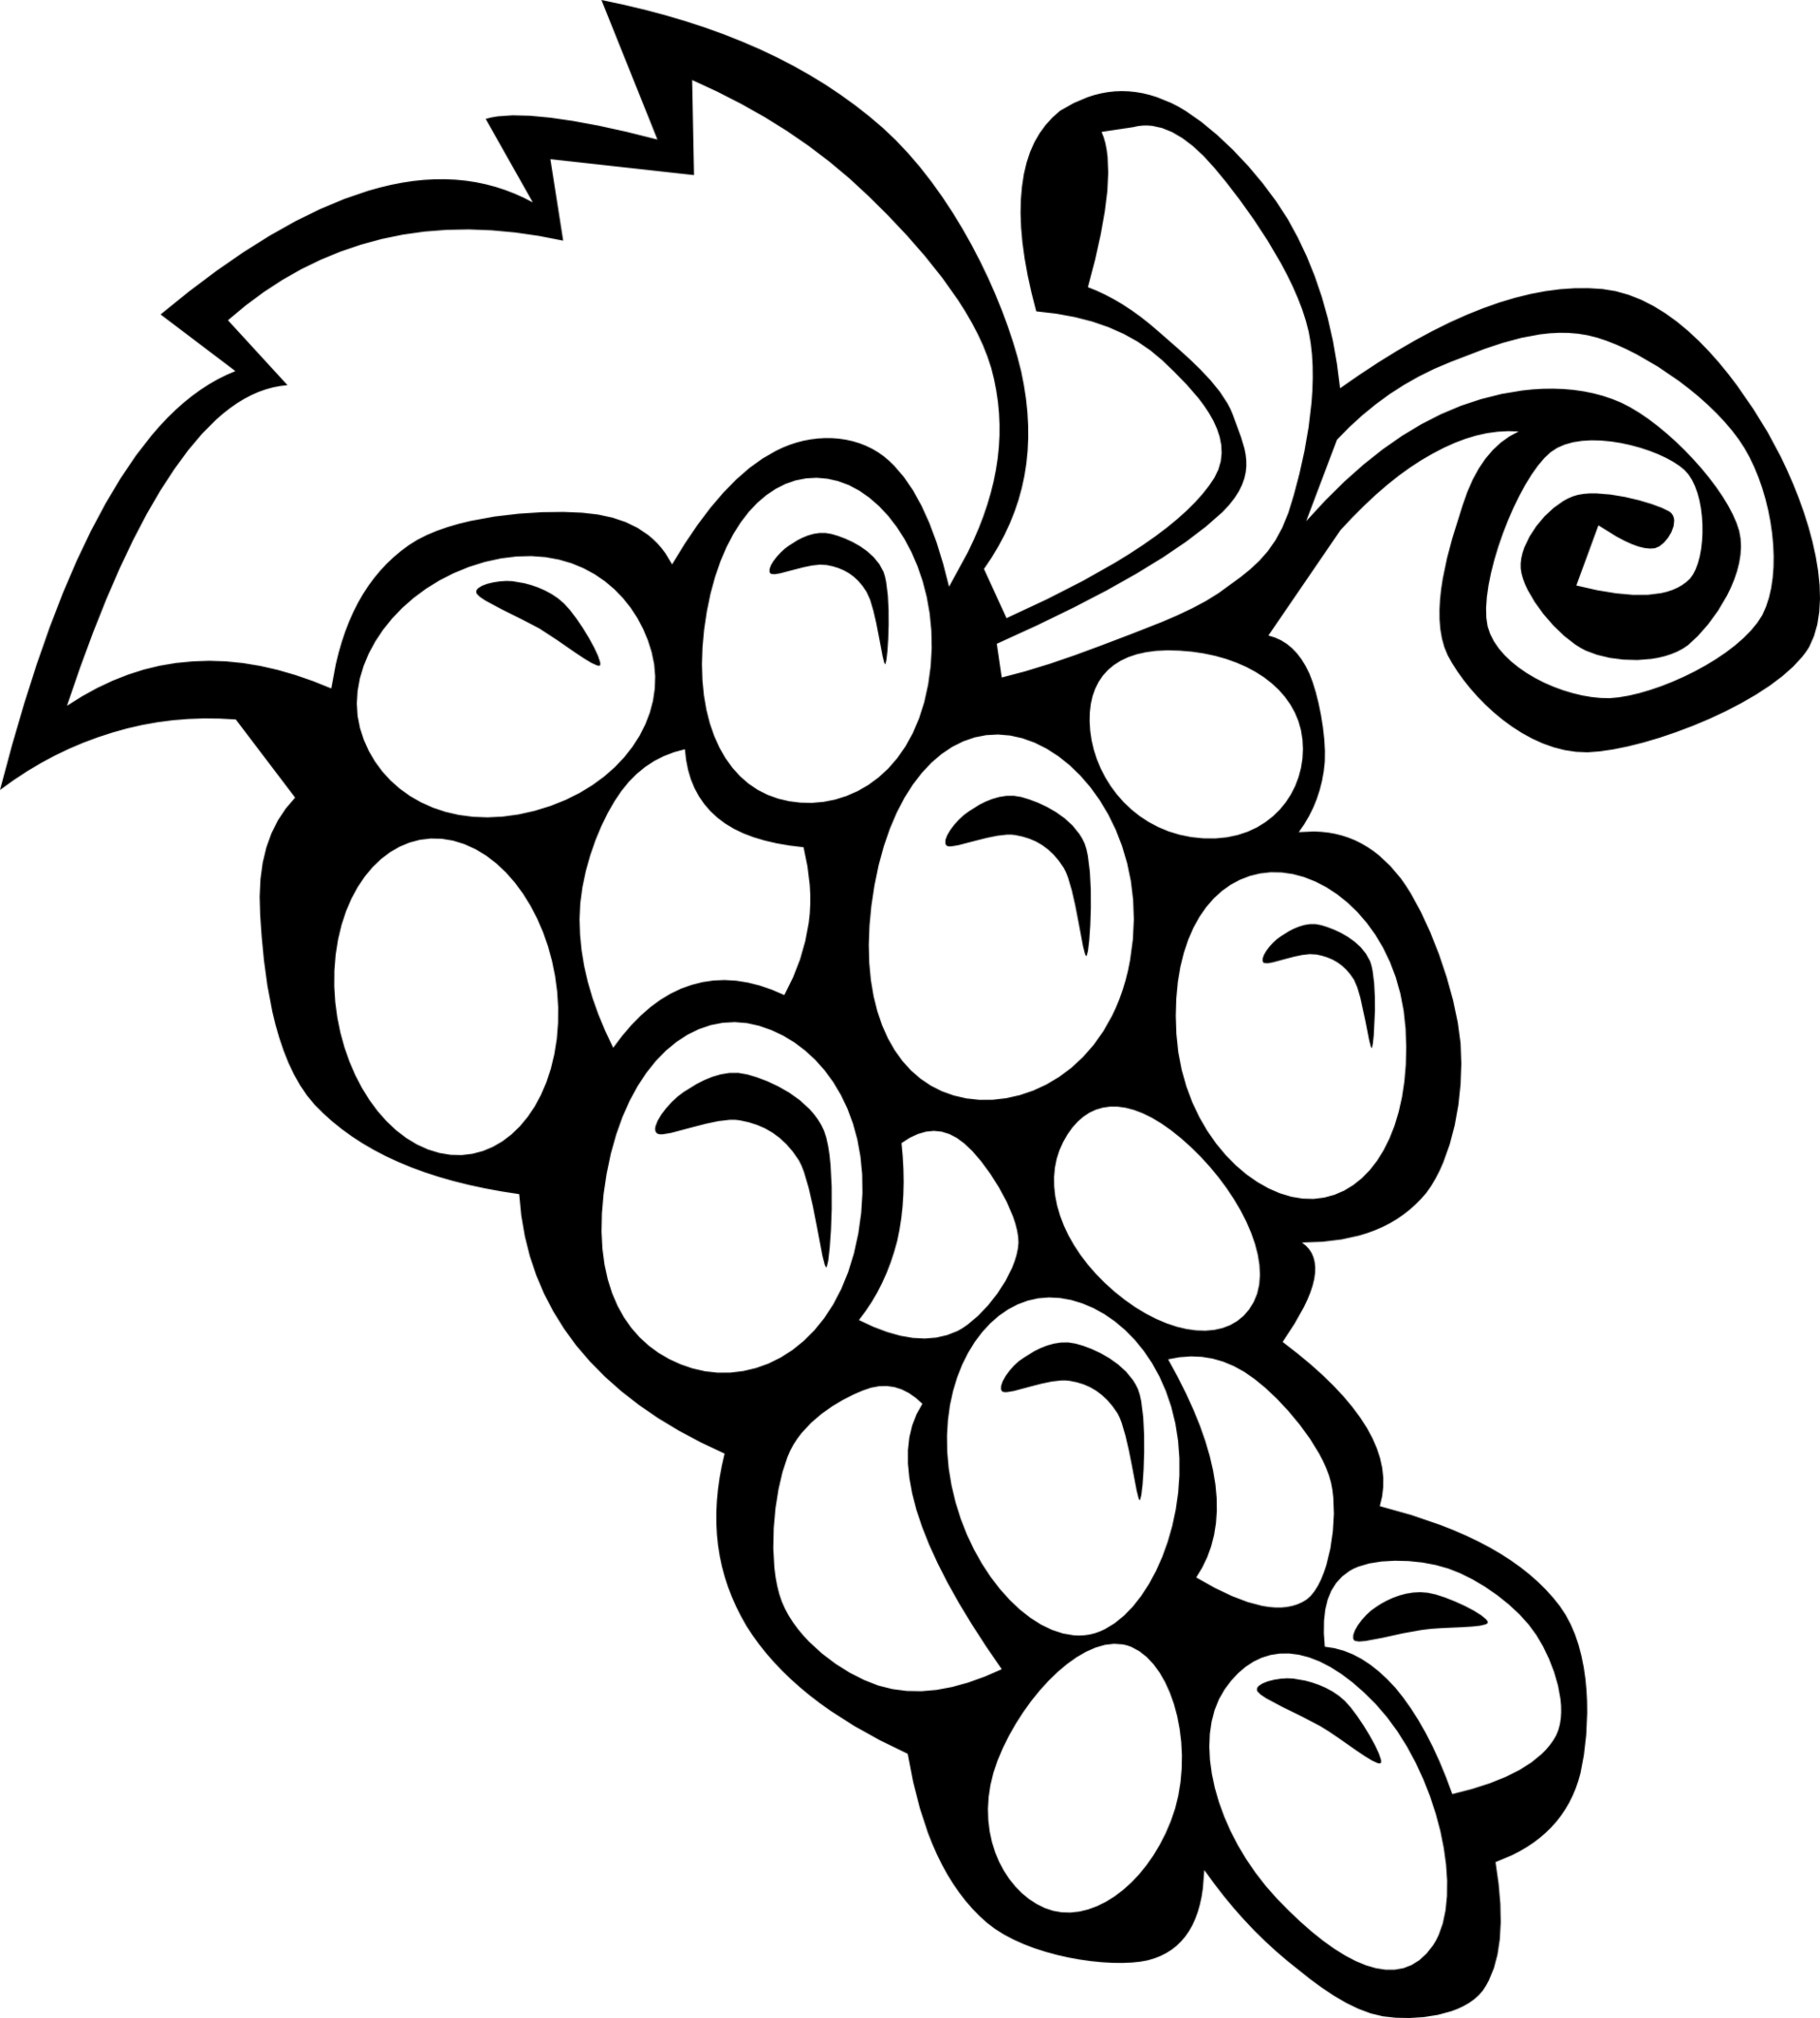 Fruits clipart black and white